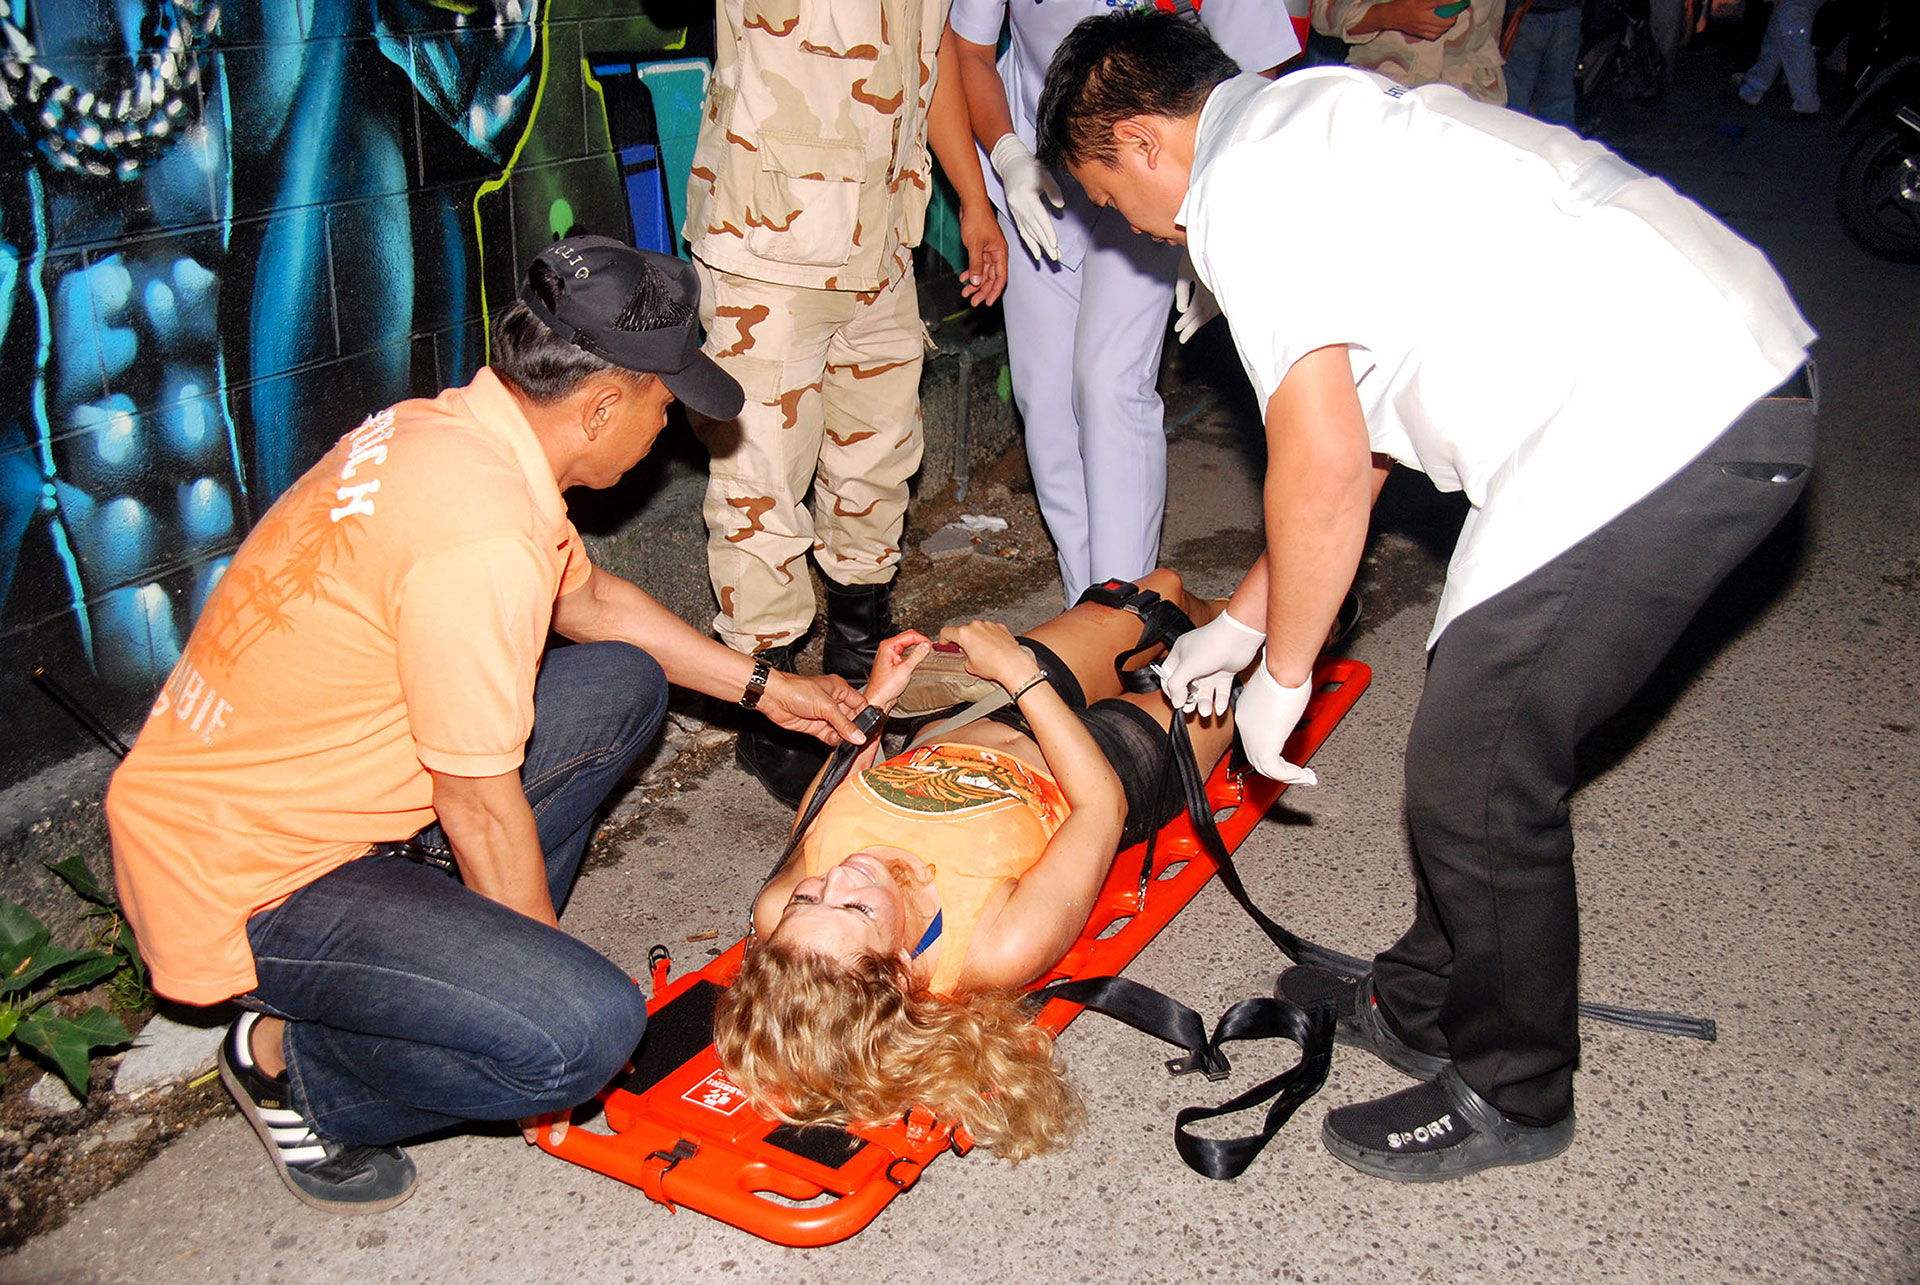 In this Thursday, Aug. 11, 2016, photo, an injured person is helped after a bomb blast in the southern resort city of Hua Hin, 240 kilometers (150 miles) south of Bangkok, Thailand. Police are investigating a series of bomb blasts in Hua Hin and other cities in Thailand. (Daily News via AP)